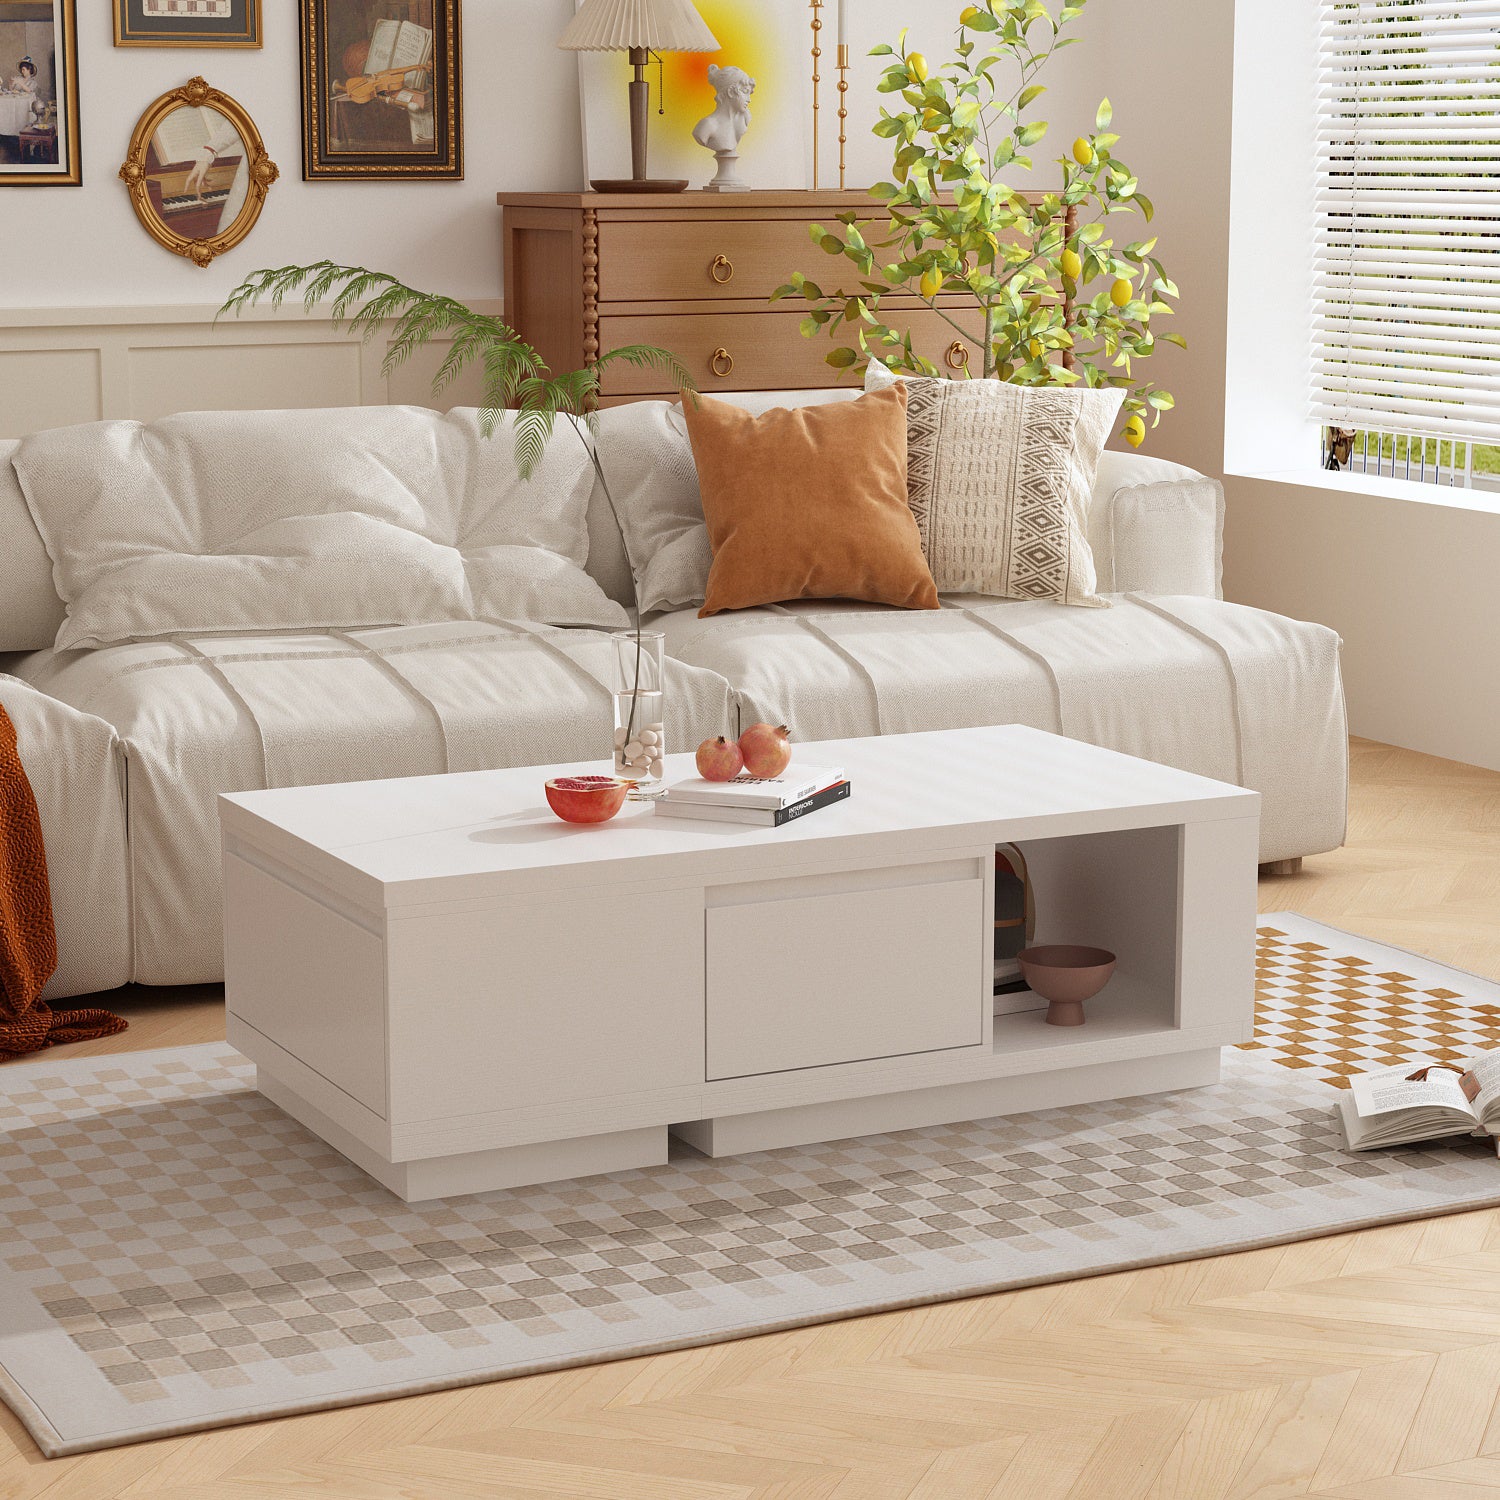 Living Room Coffee Table with Storage 3 Drawers Expandable Table